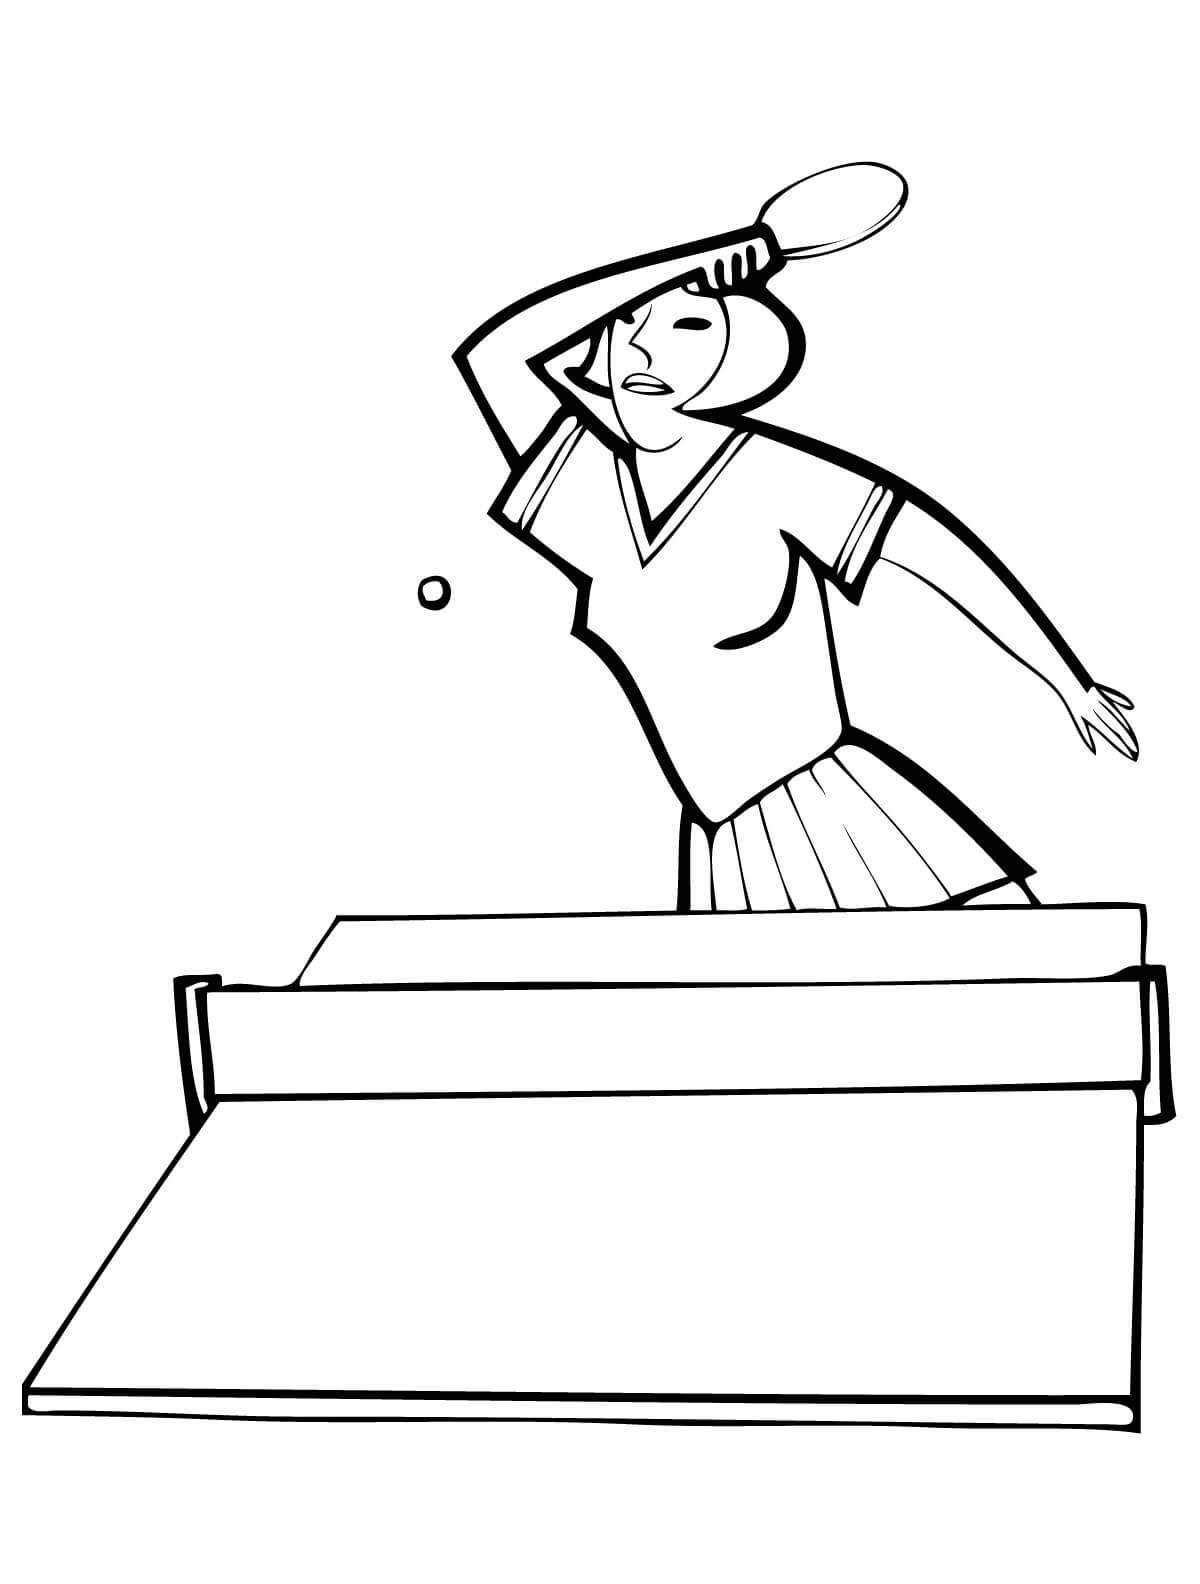 free table tennis coloring pages